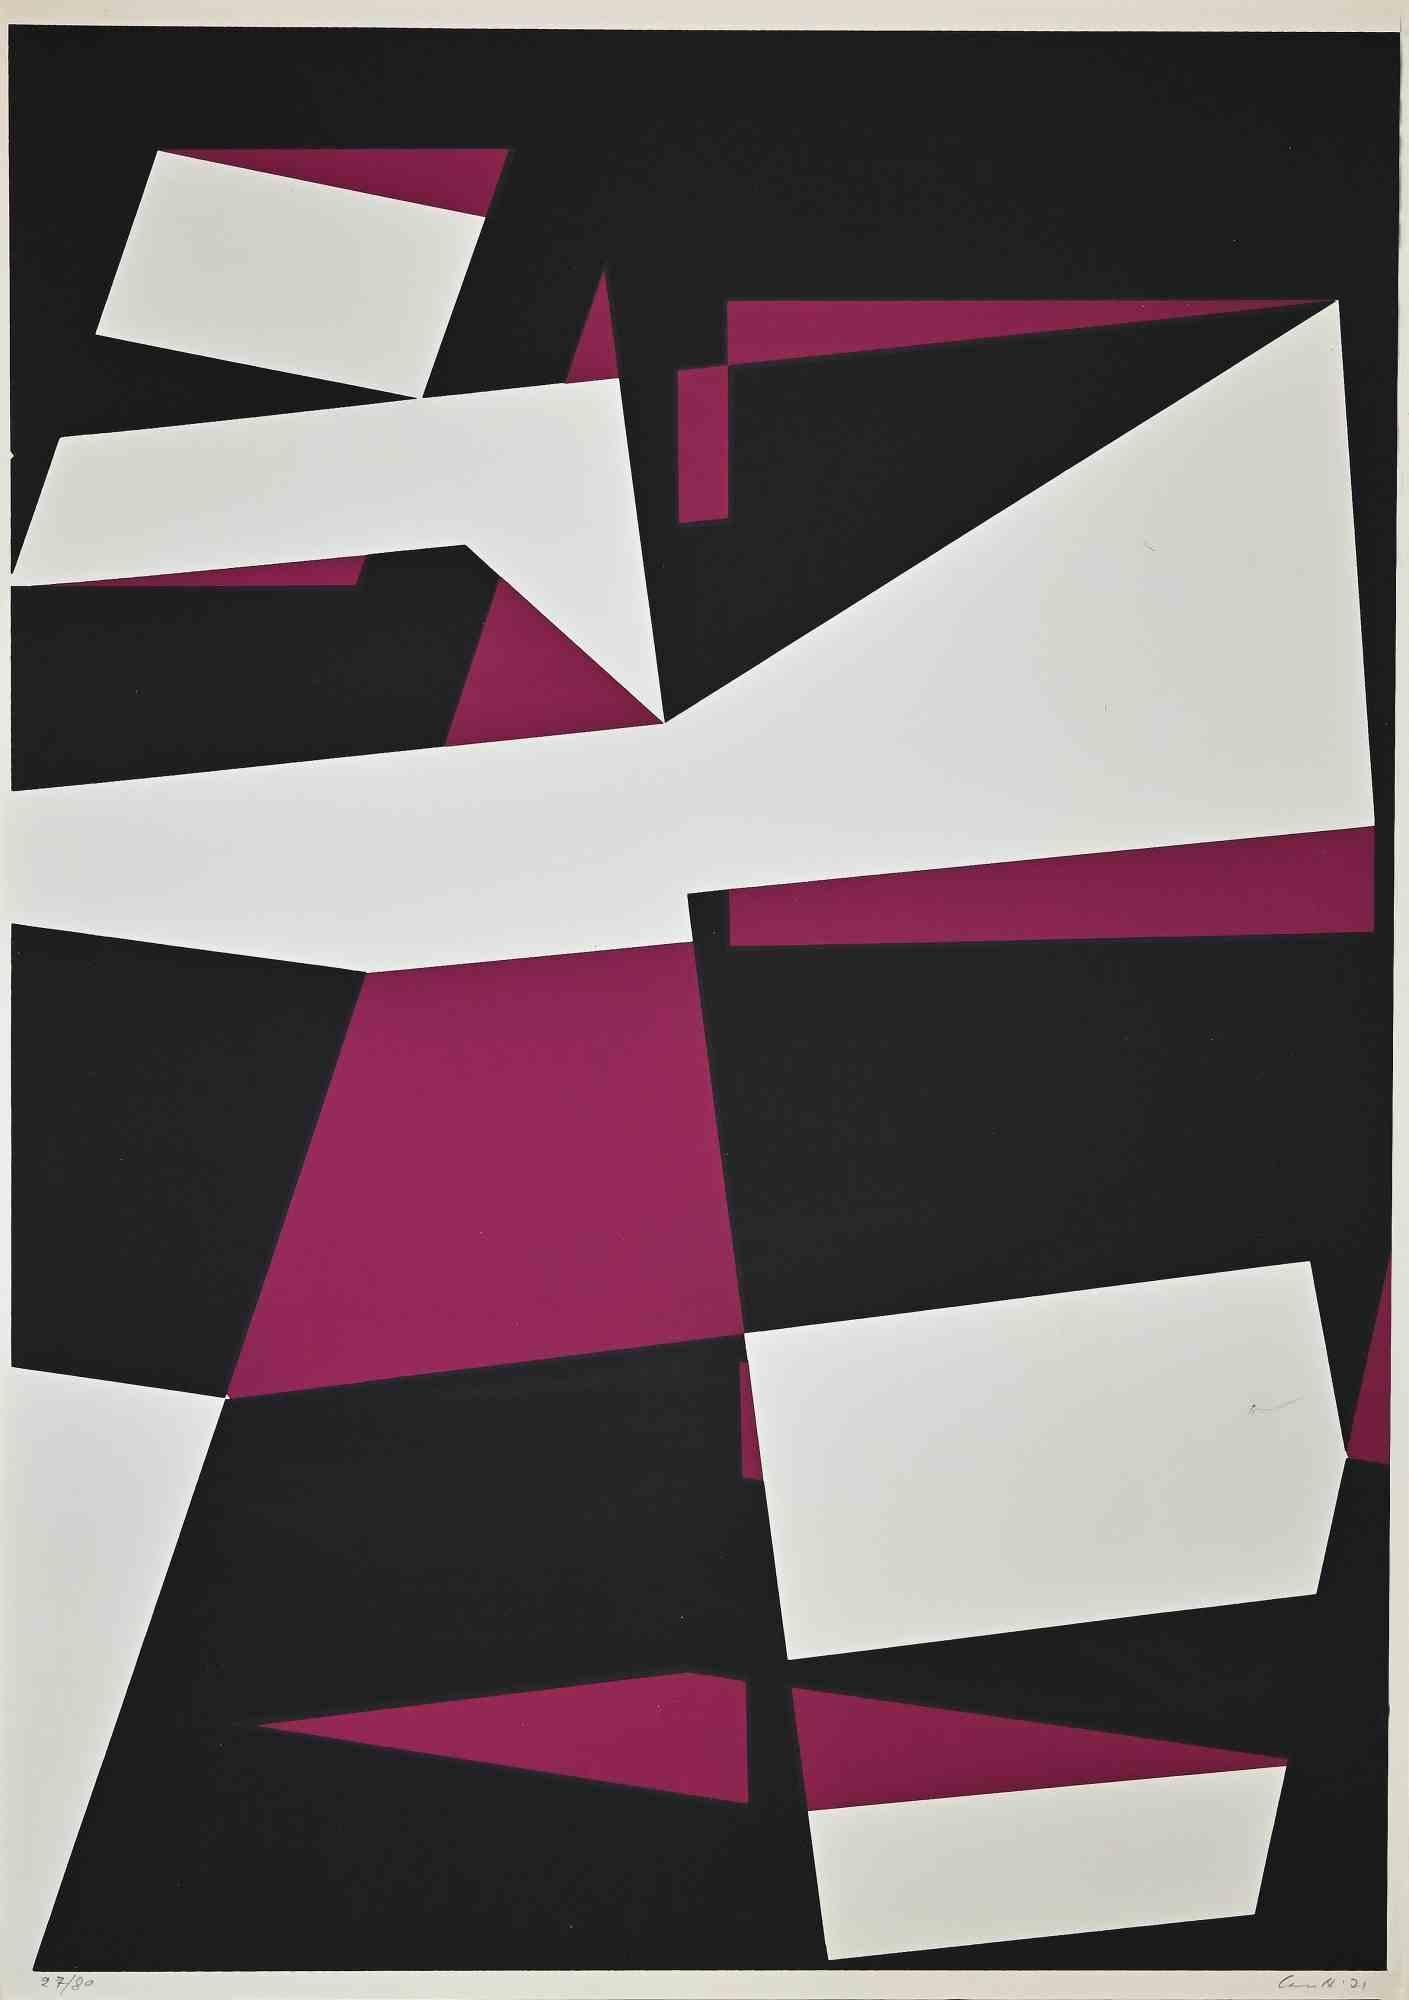  Violet Composition - Screen Print by Uberto Maria Casotti - 1971